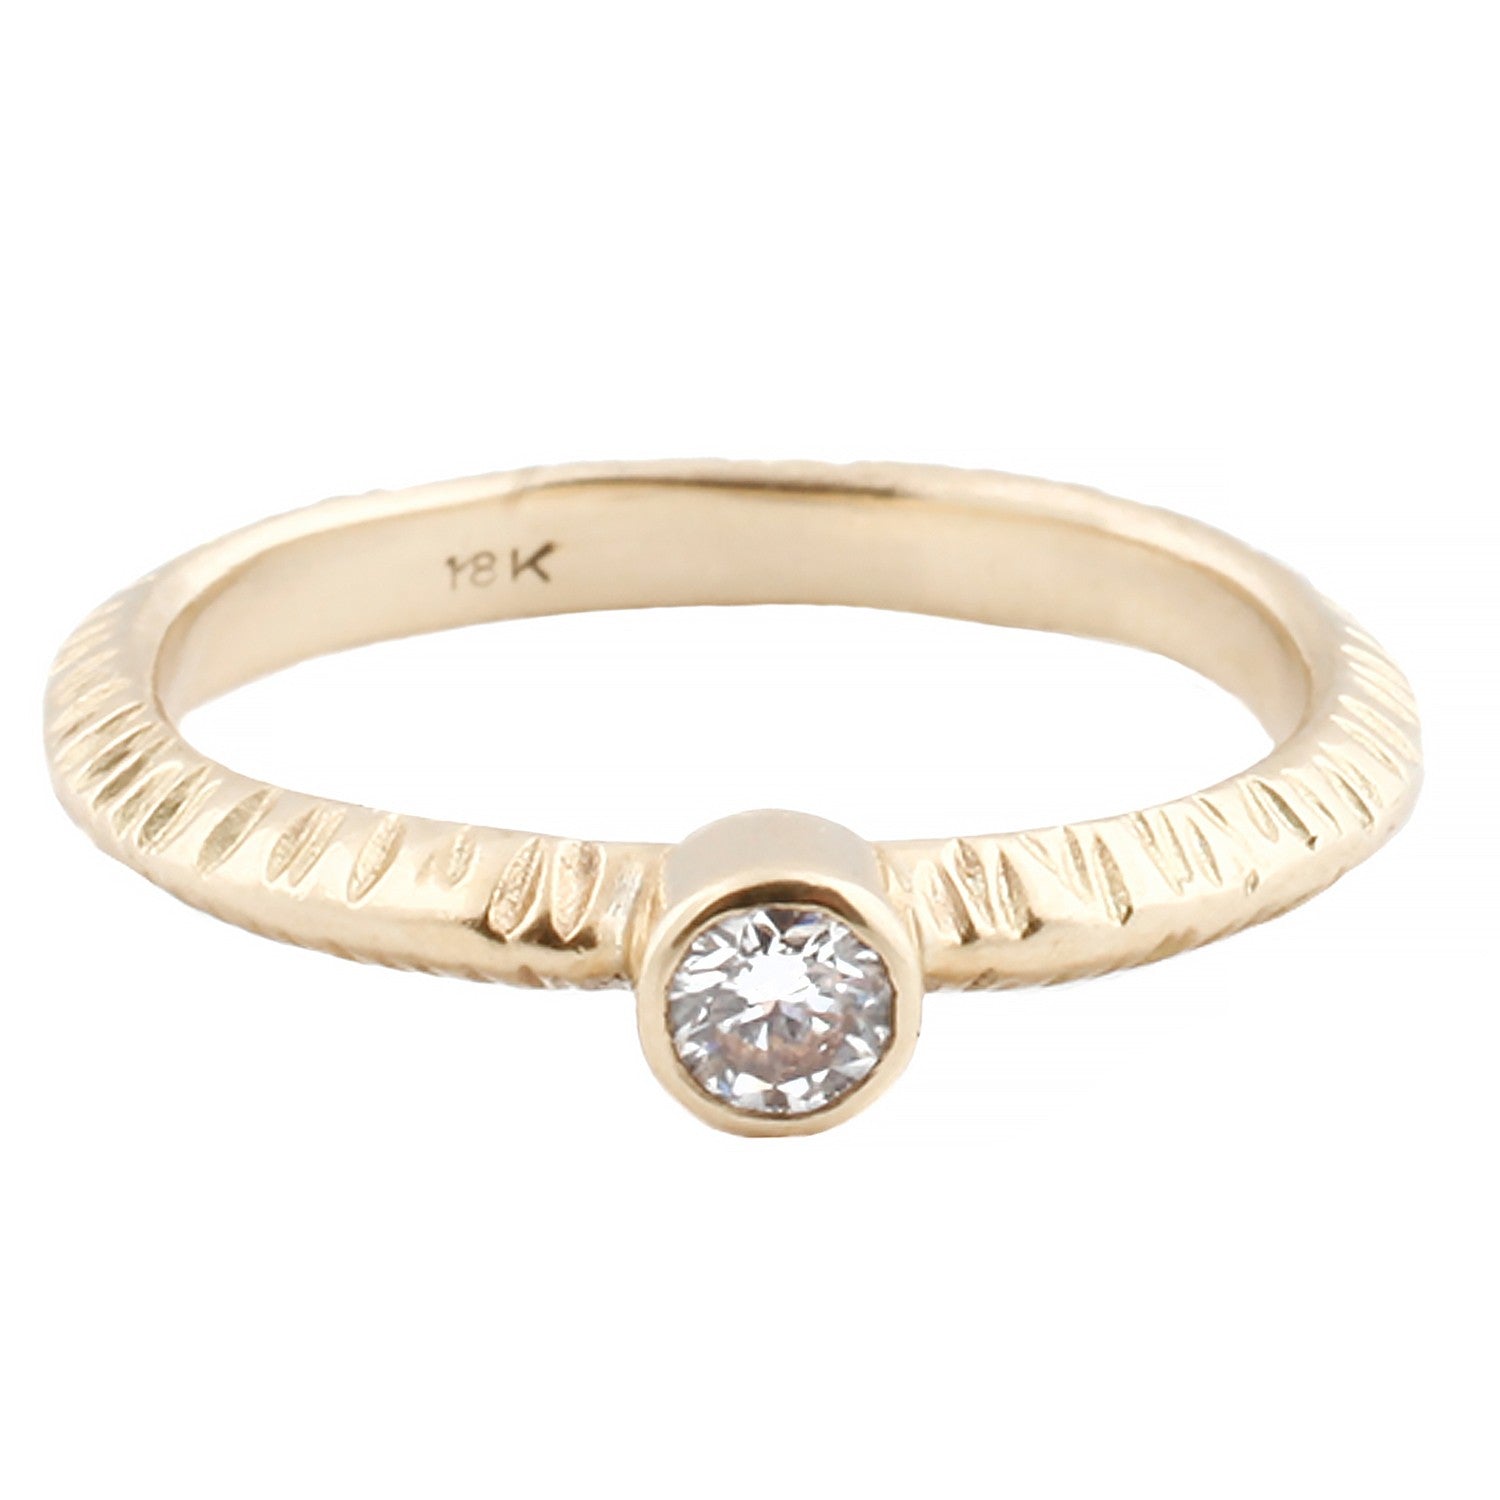 Sarah Swell Notch Diamond Solitaire Ring